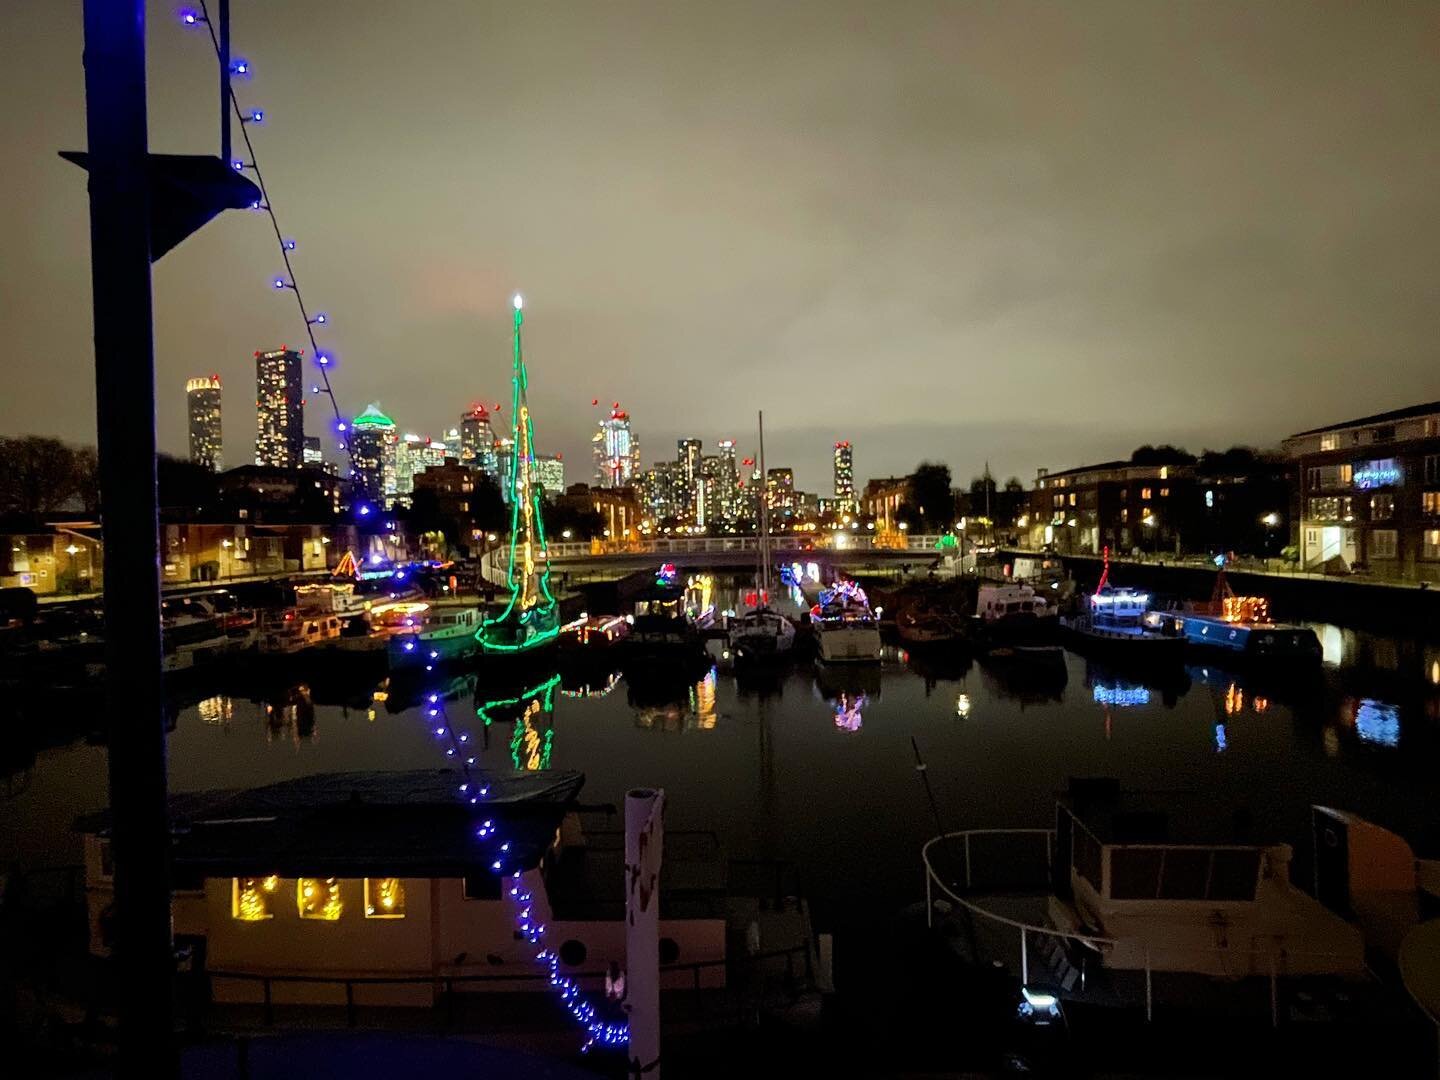 More illuminations added to boats as @greenlanddockfestival competes with #canarywharf 🌲🎁🤩 #christmaslights #greenlanddock #canadawater #se16 #london